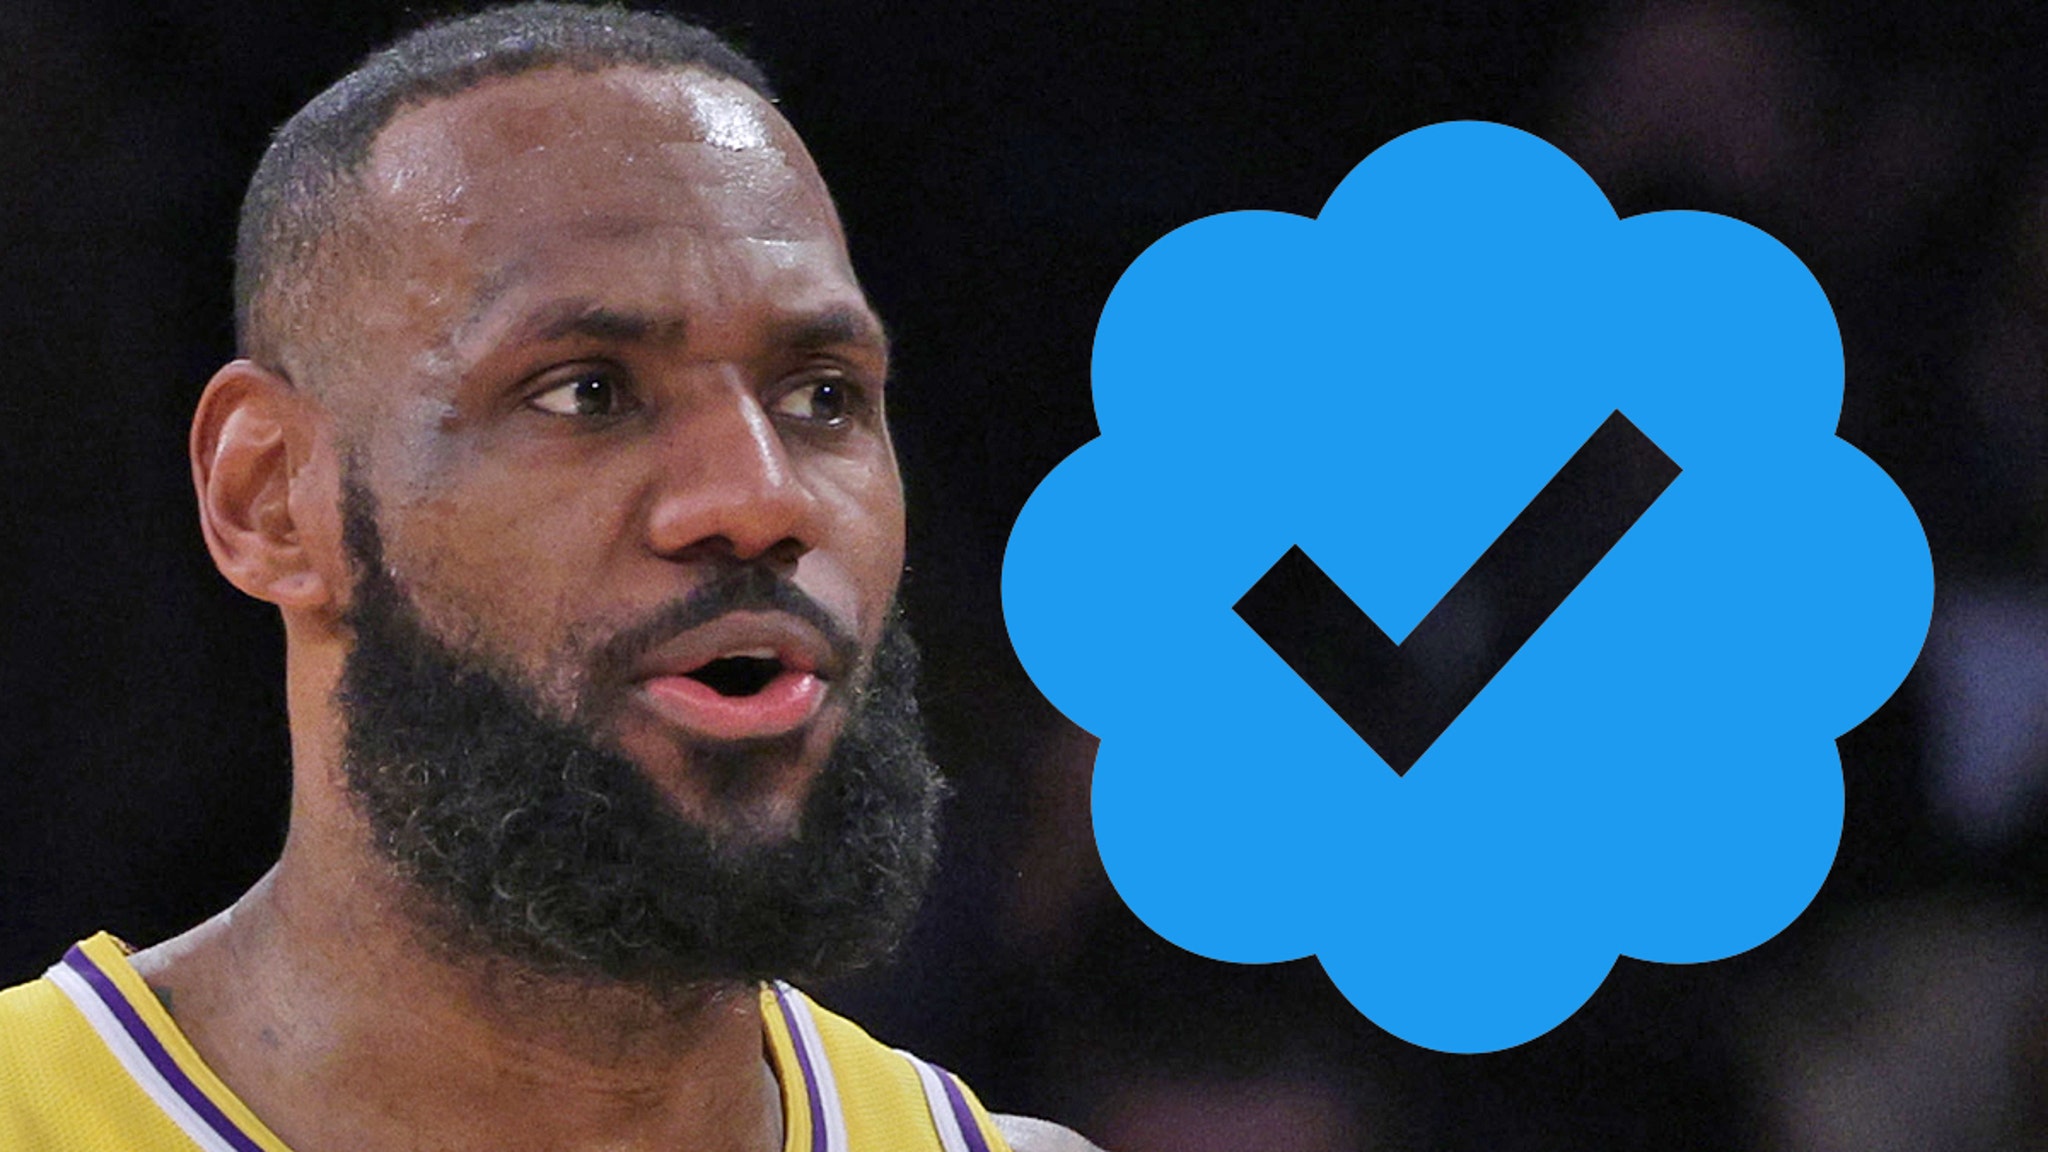 LeBron James shows the world he's just like us, refuses to pay $8 a month  for Twitter verification